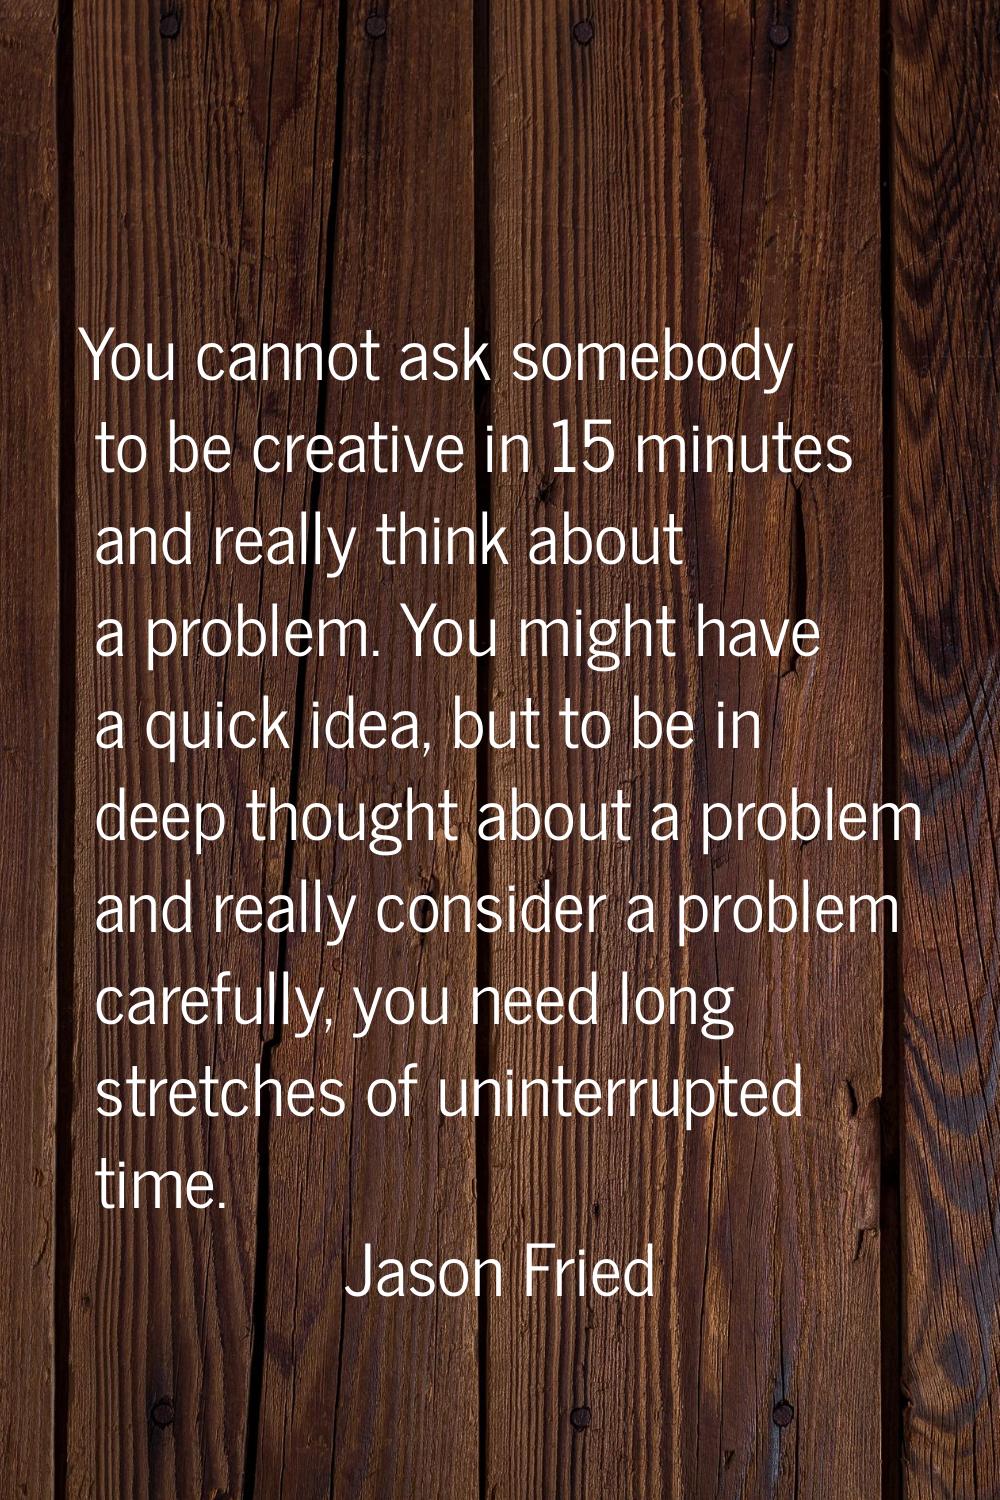 You cannot ask somebody to be creative in 15 minutes and really think about a problem. You might ha